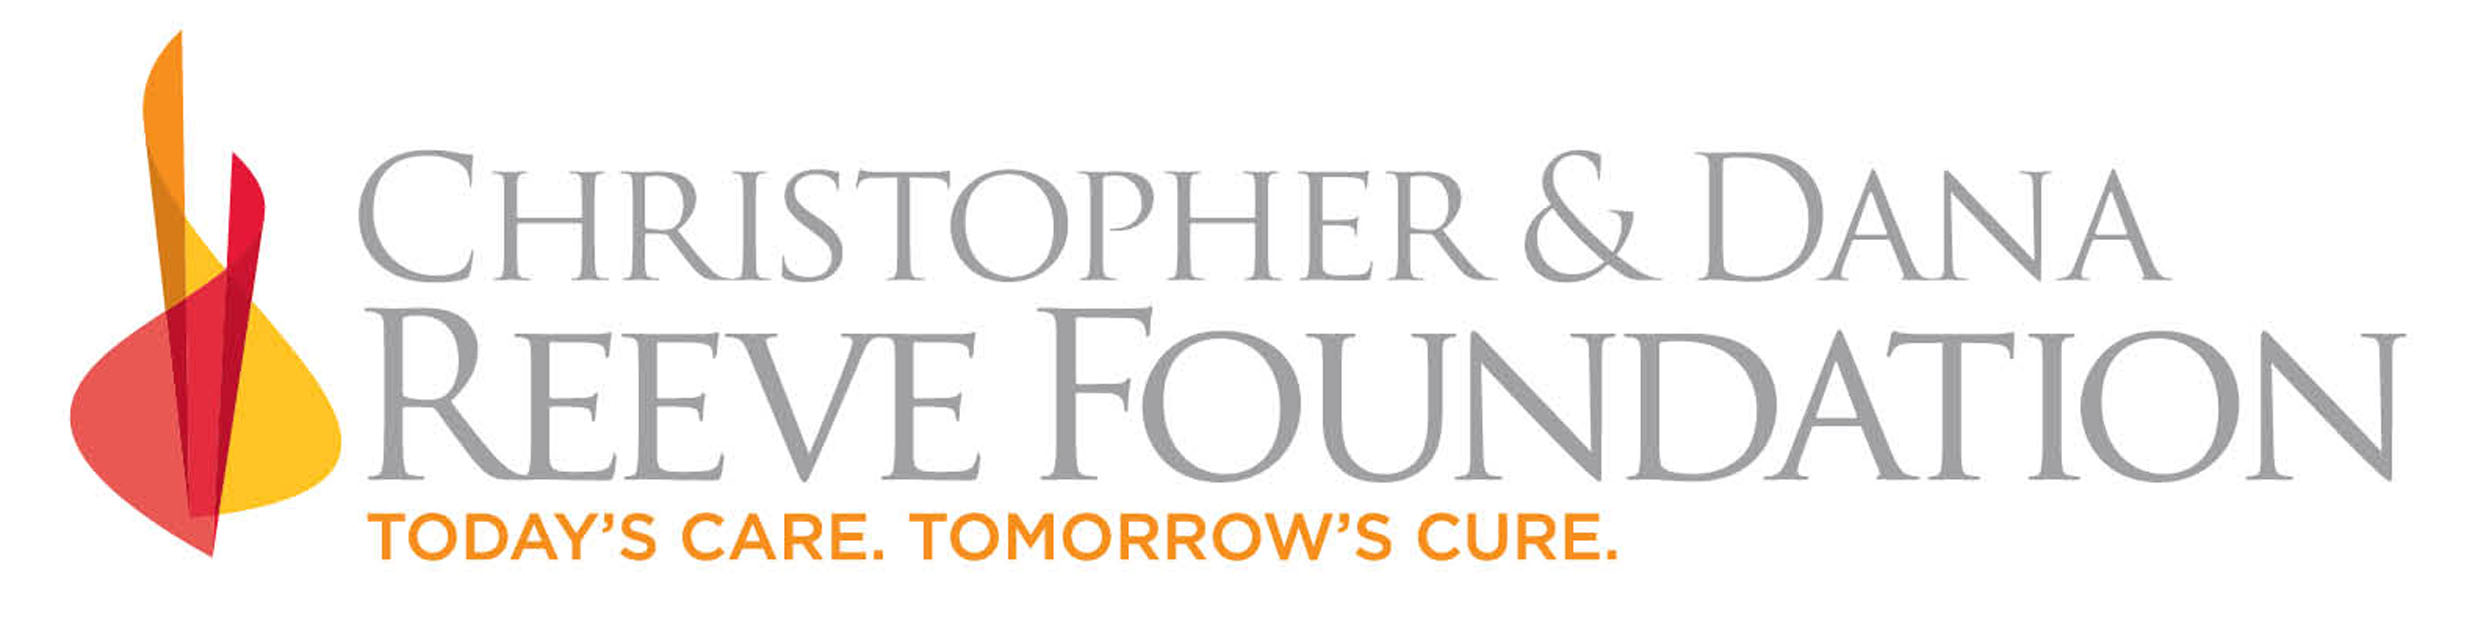 Reeve_Foundation_logo.png